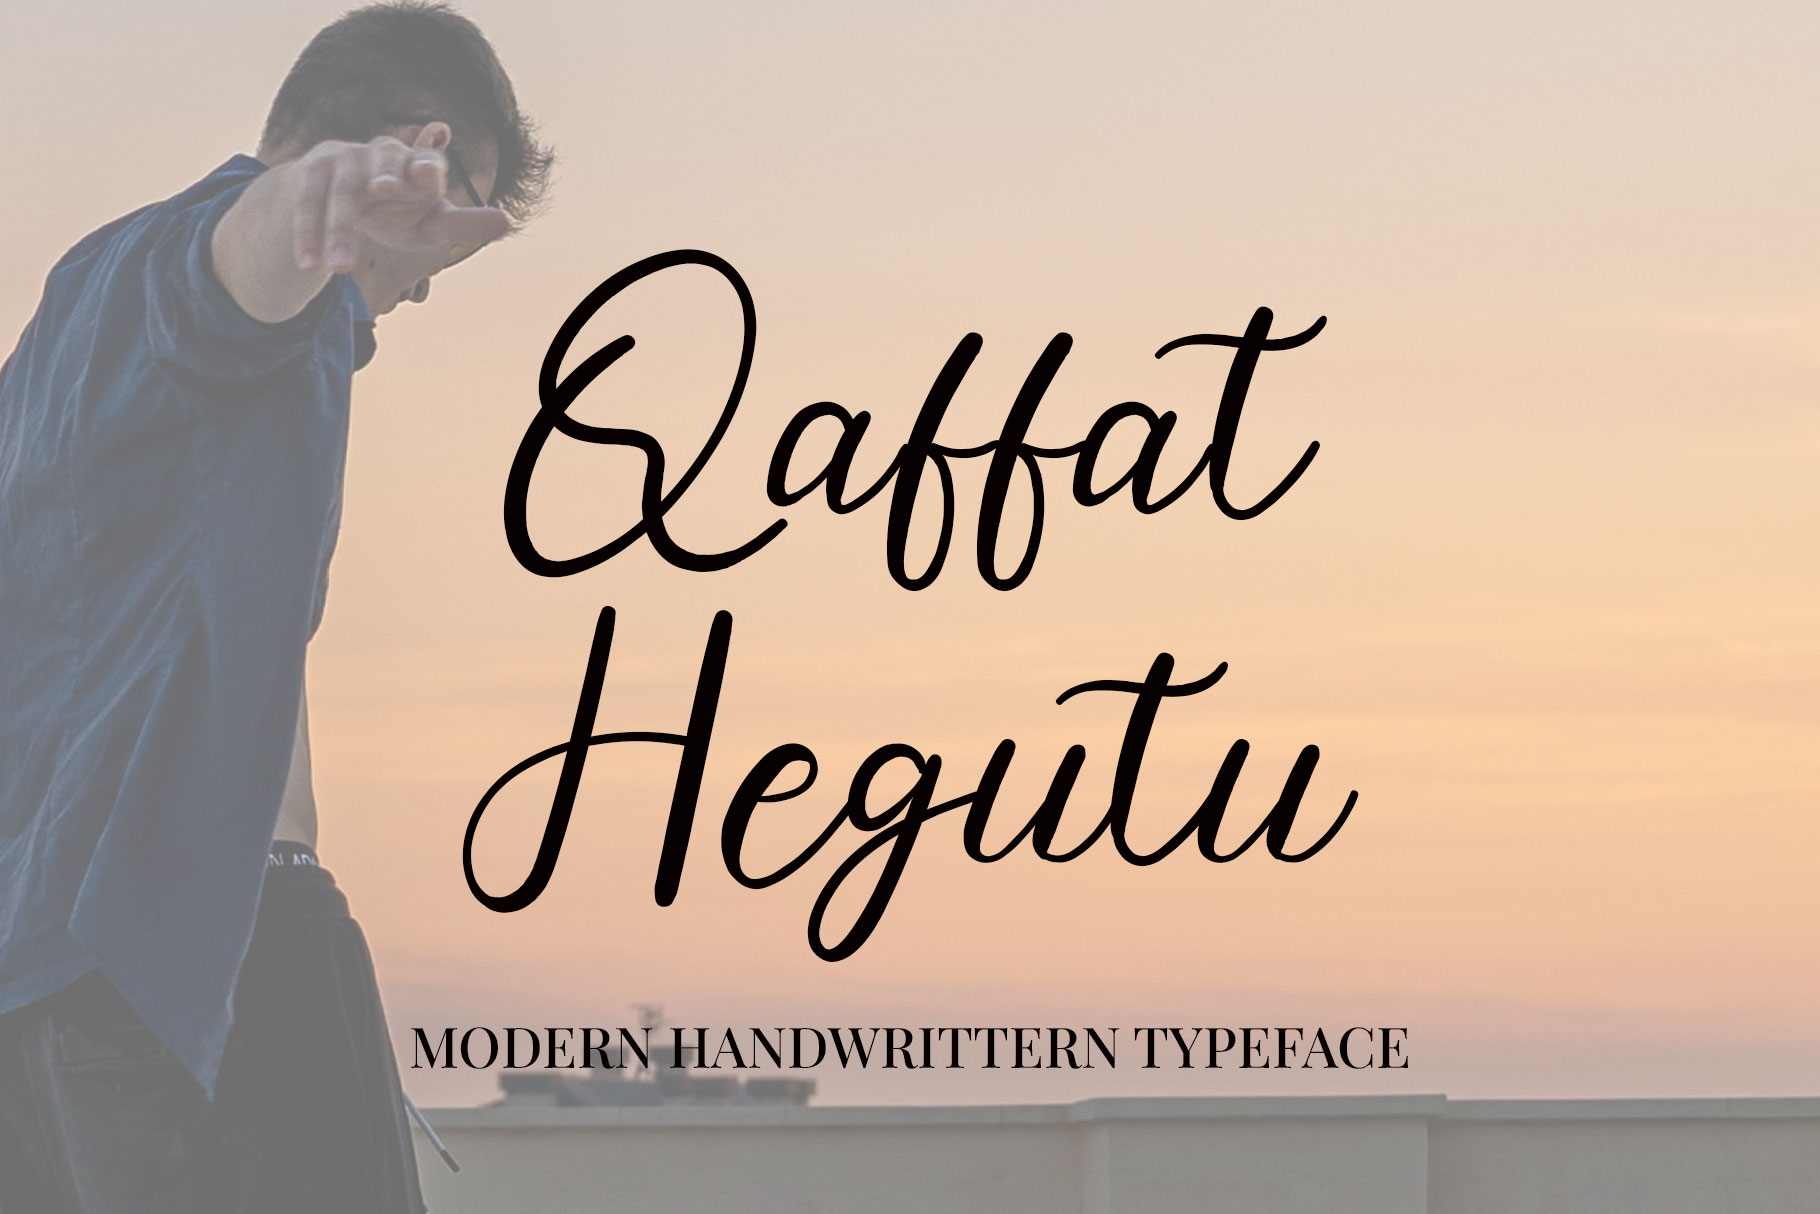 An image with text showing the fabulous Akosta font